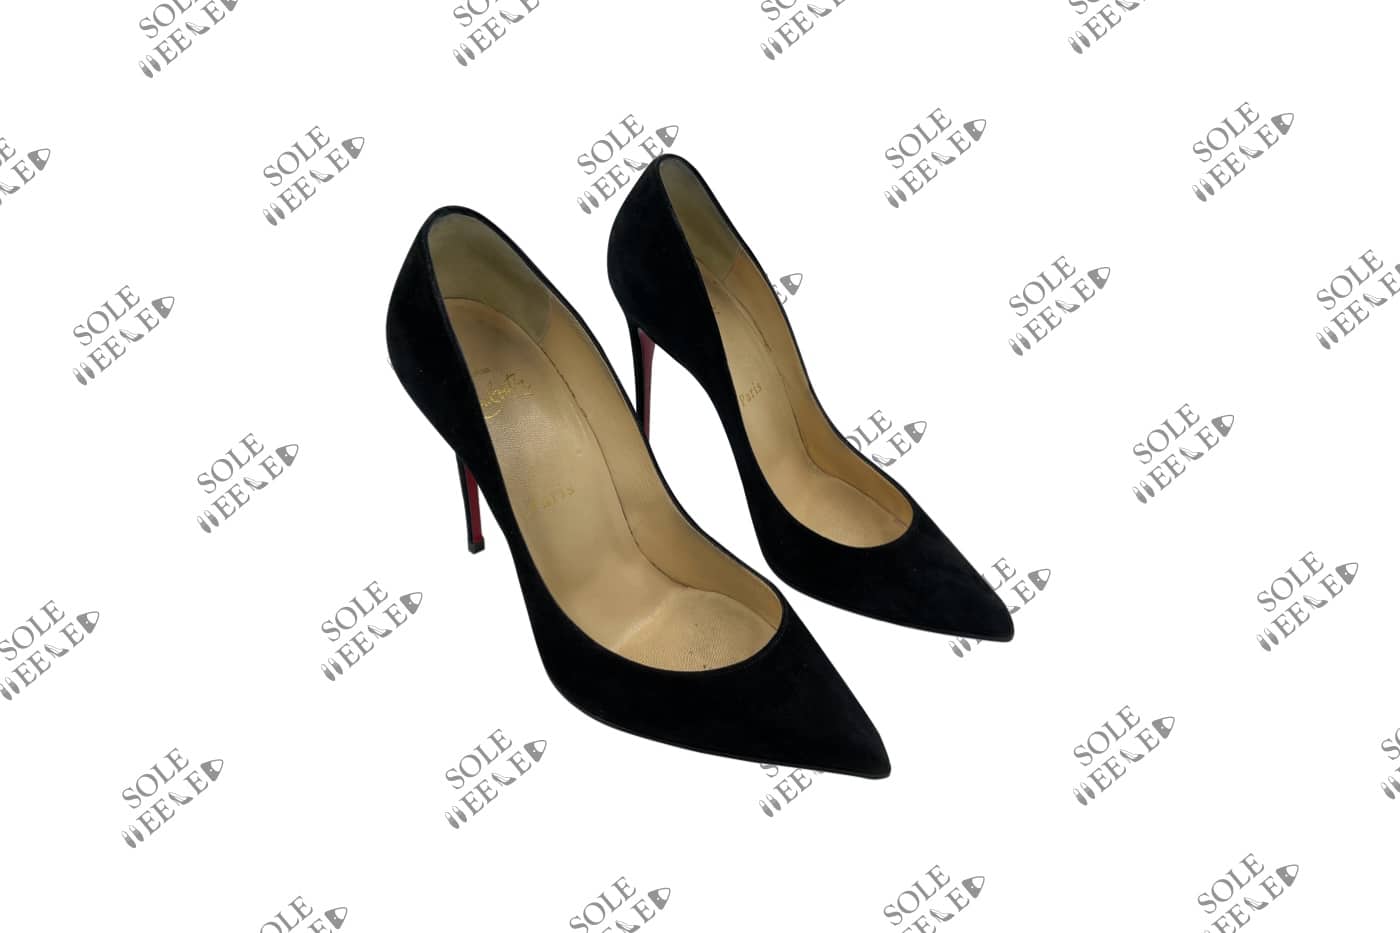 Louboutin Heel Repair and Sole Protection